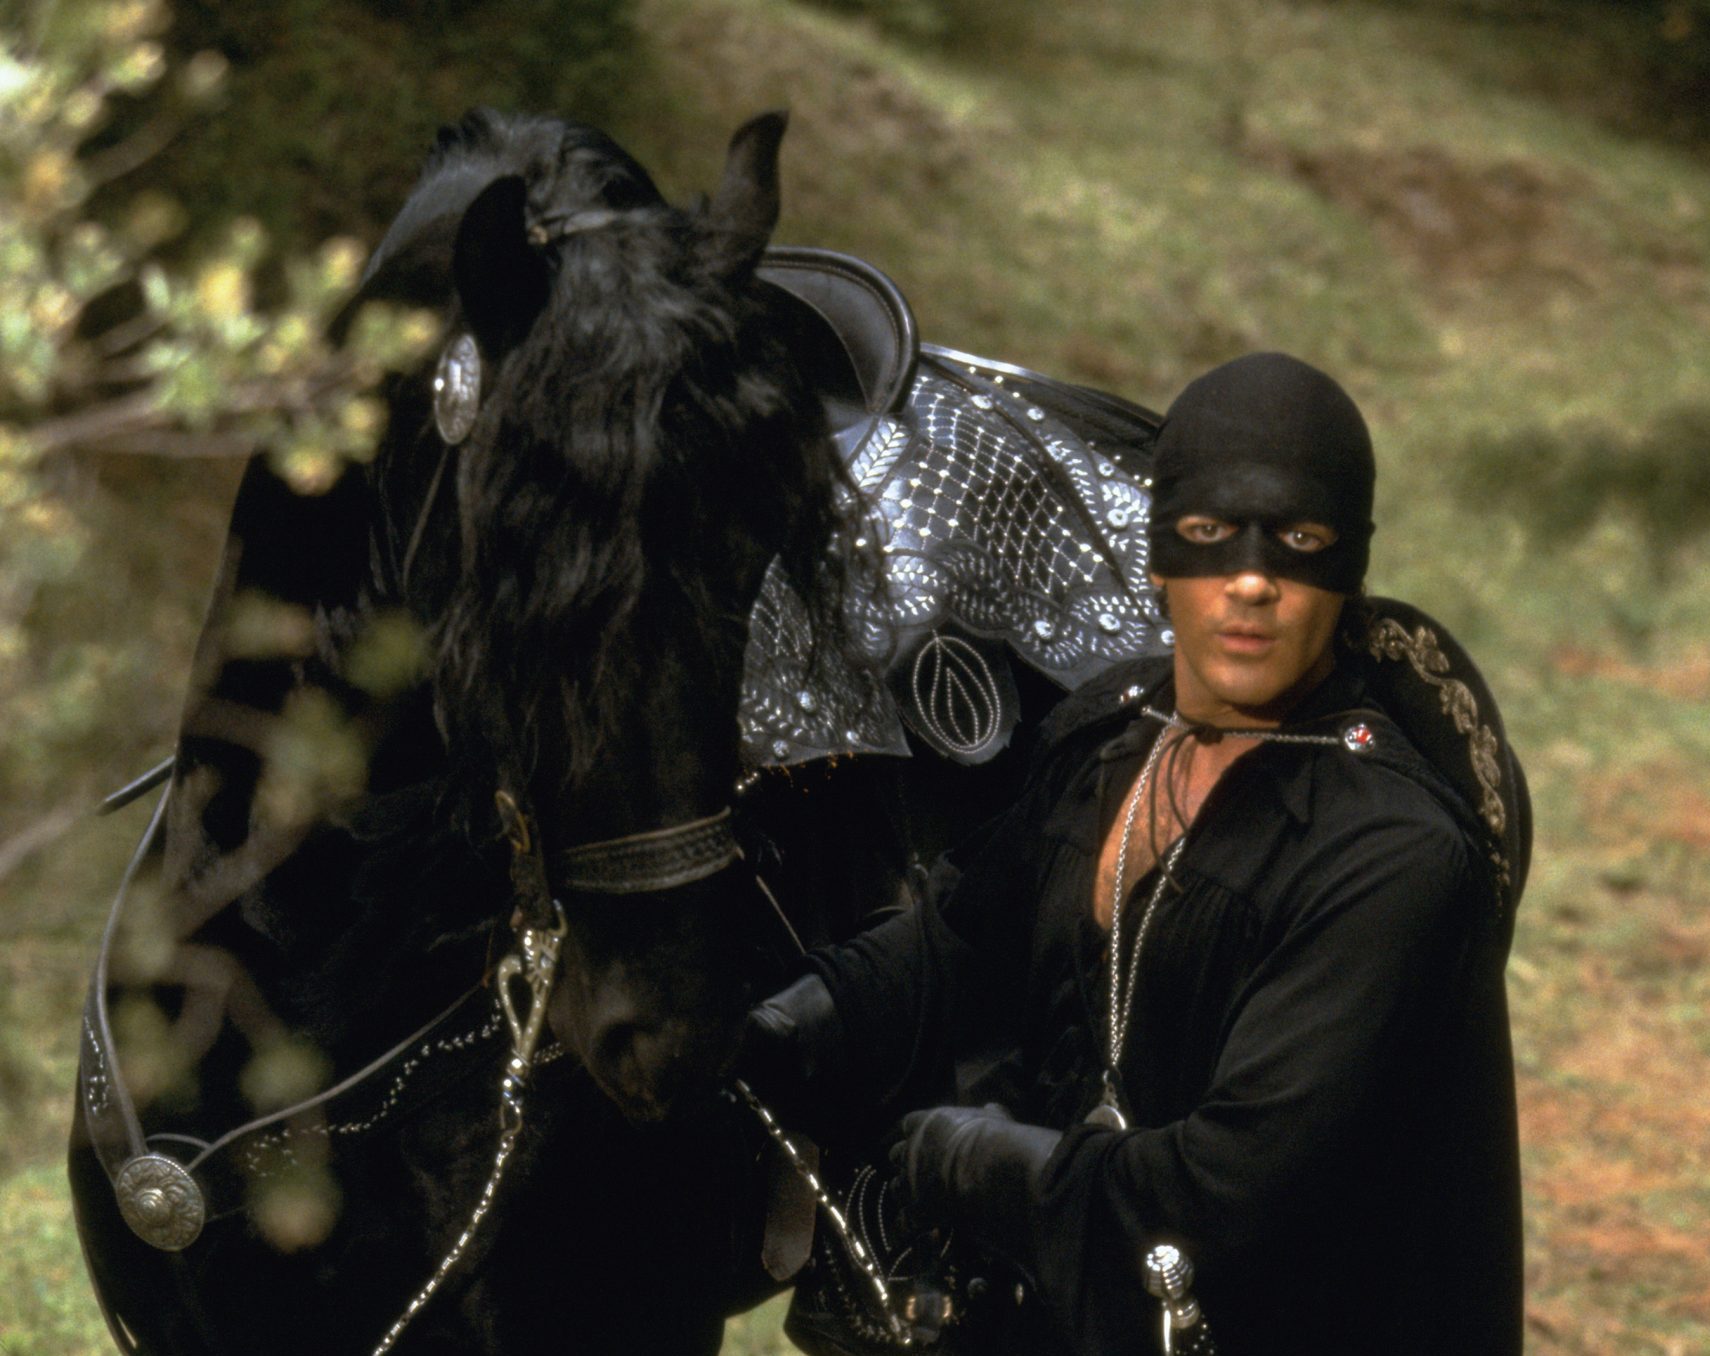 Beyond The Mask — Zorro History, Lore, And More